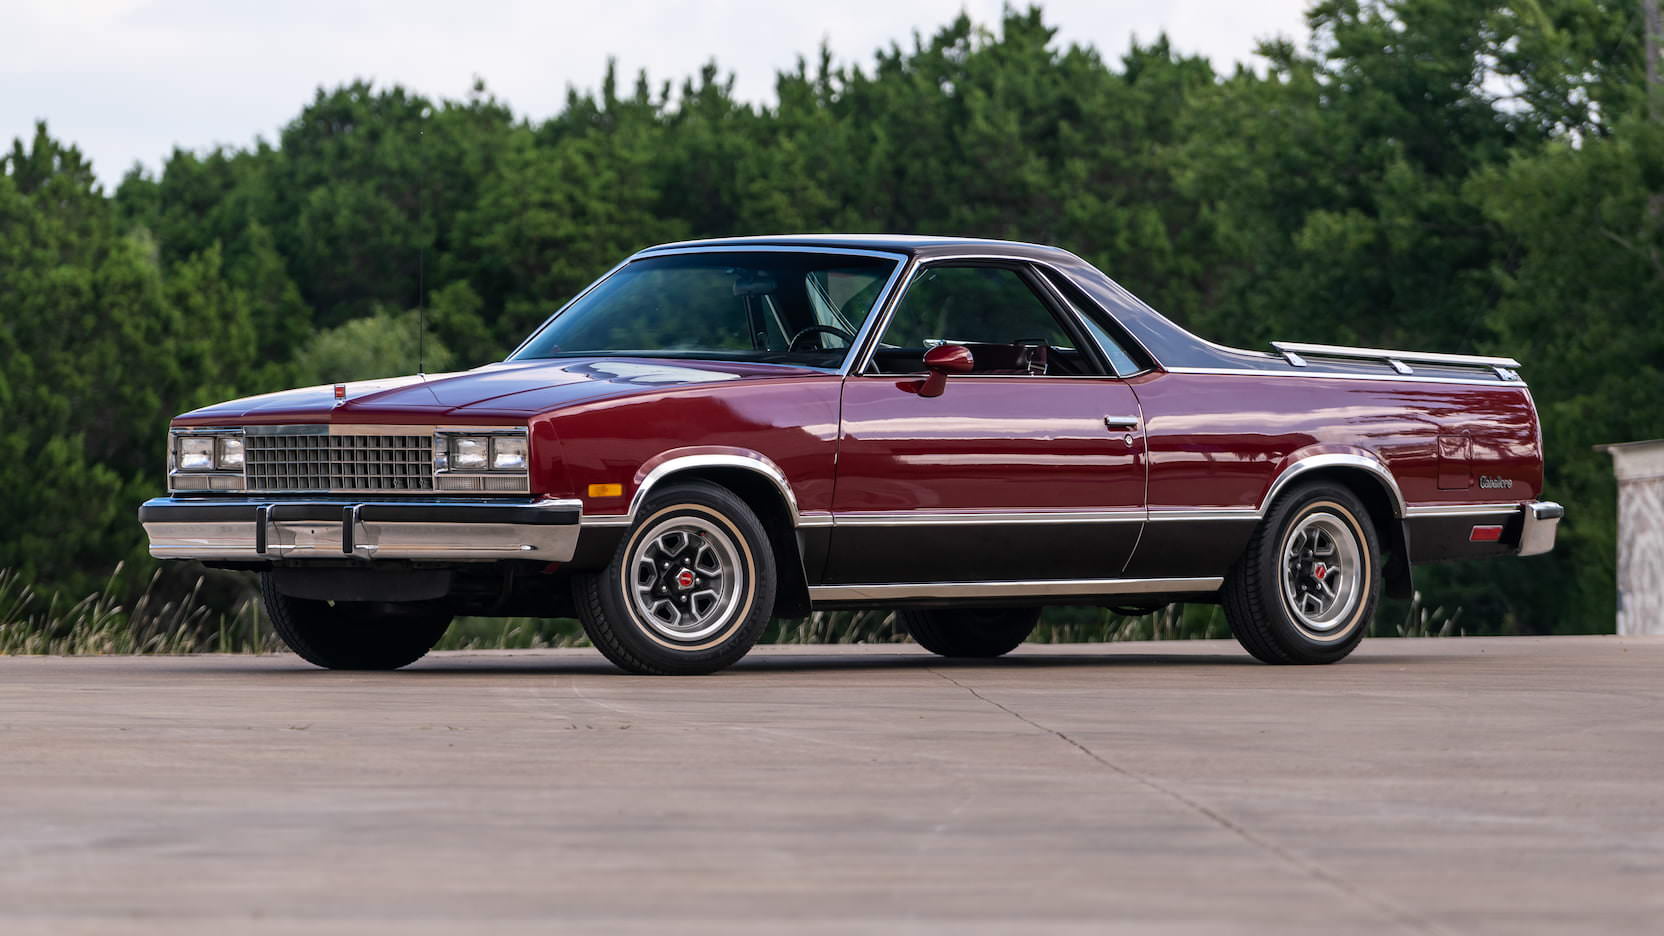 1985 Gmc Caballero The Little Known Sibling Of The El Camino